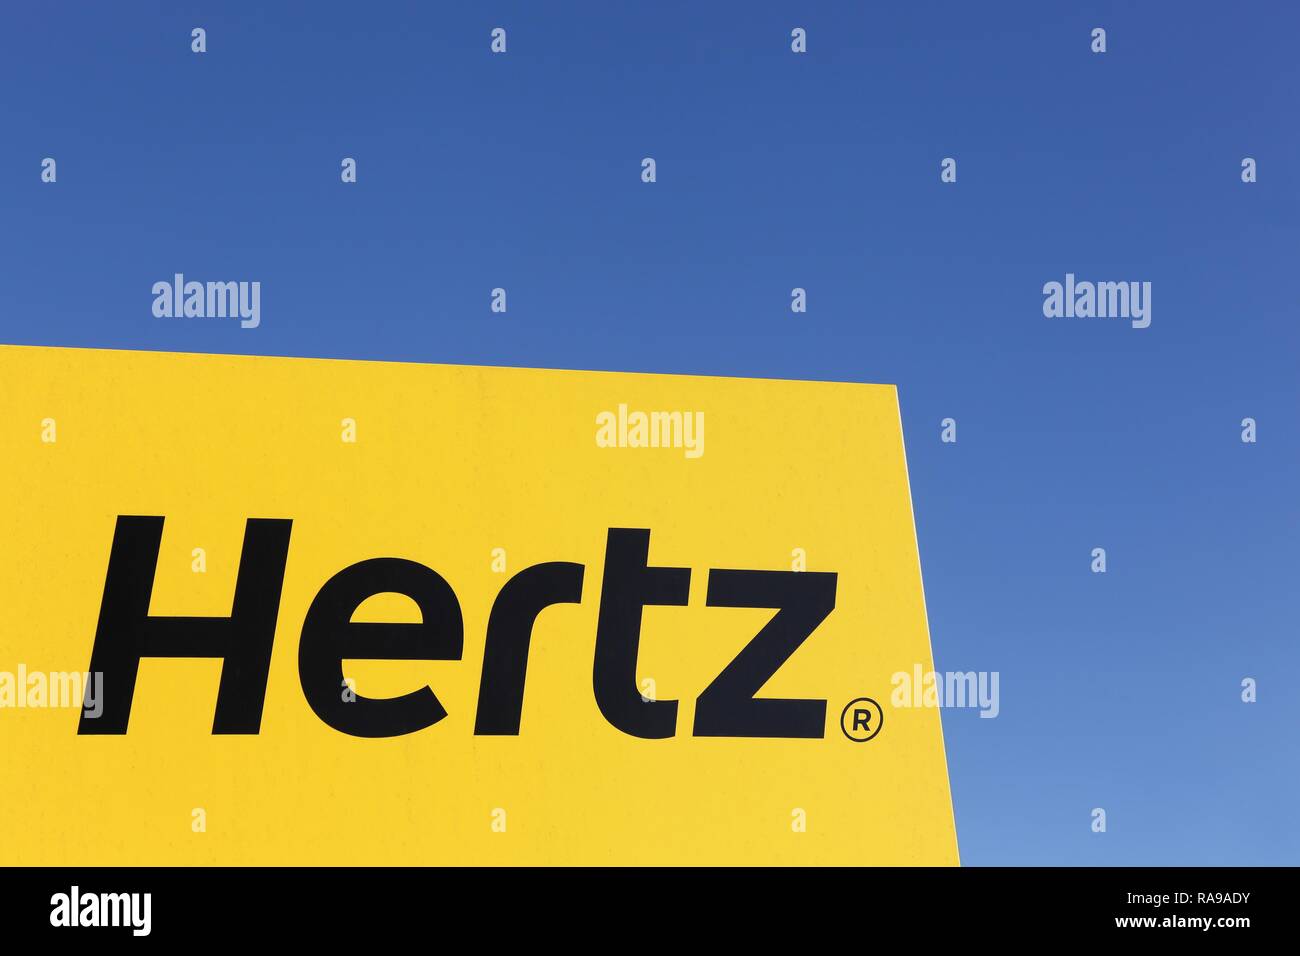 Aarhus, Denmark - February 13, 2016: Hertz logo on a panel. Hertz is an American car rental company with international locations in 145 countries Stock Photo